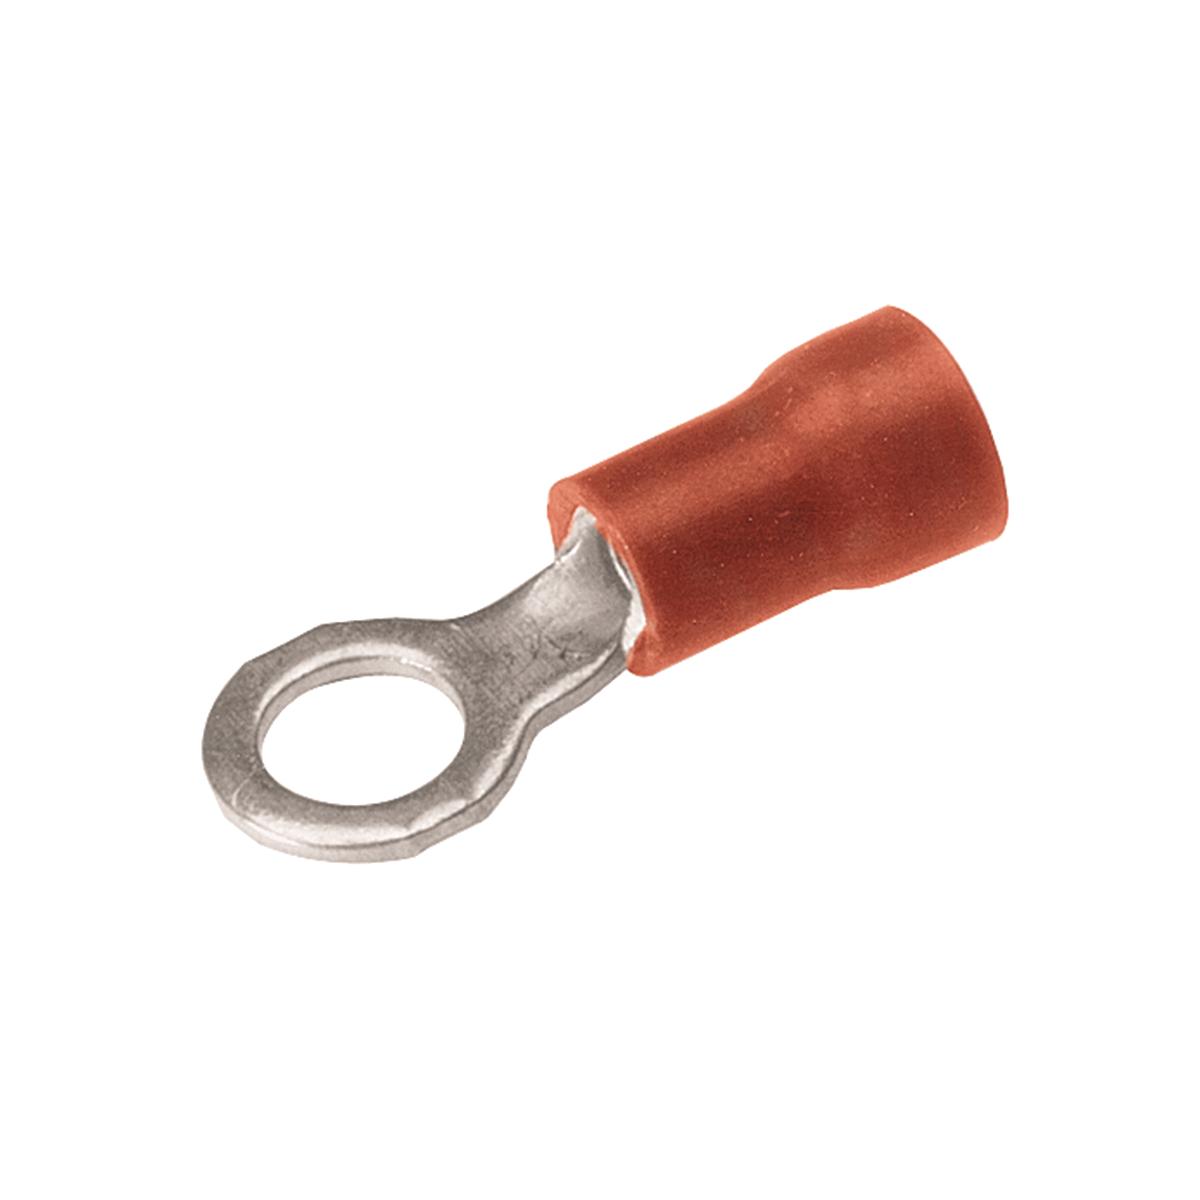 Hubbell BA16E38 Vinyl Ring Terminal For 22 - 16 AWG.  ; Expanded insulation support accepts standard and large wire diameters providing lower inventory requirements and greater flexibility ; Funnel entry for easy wire insertion ; Manufactured of pure electrolytic copper 